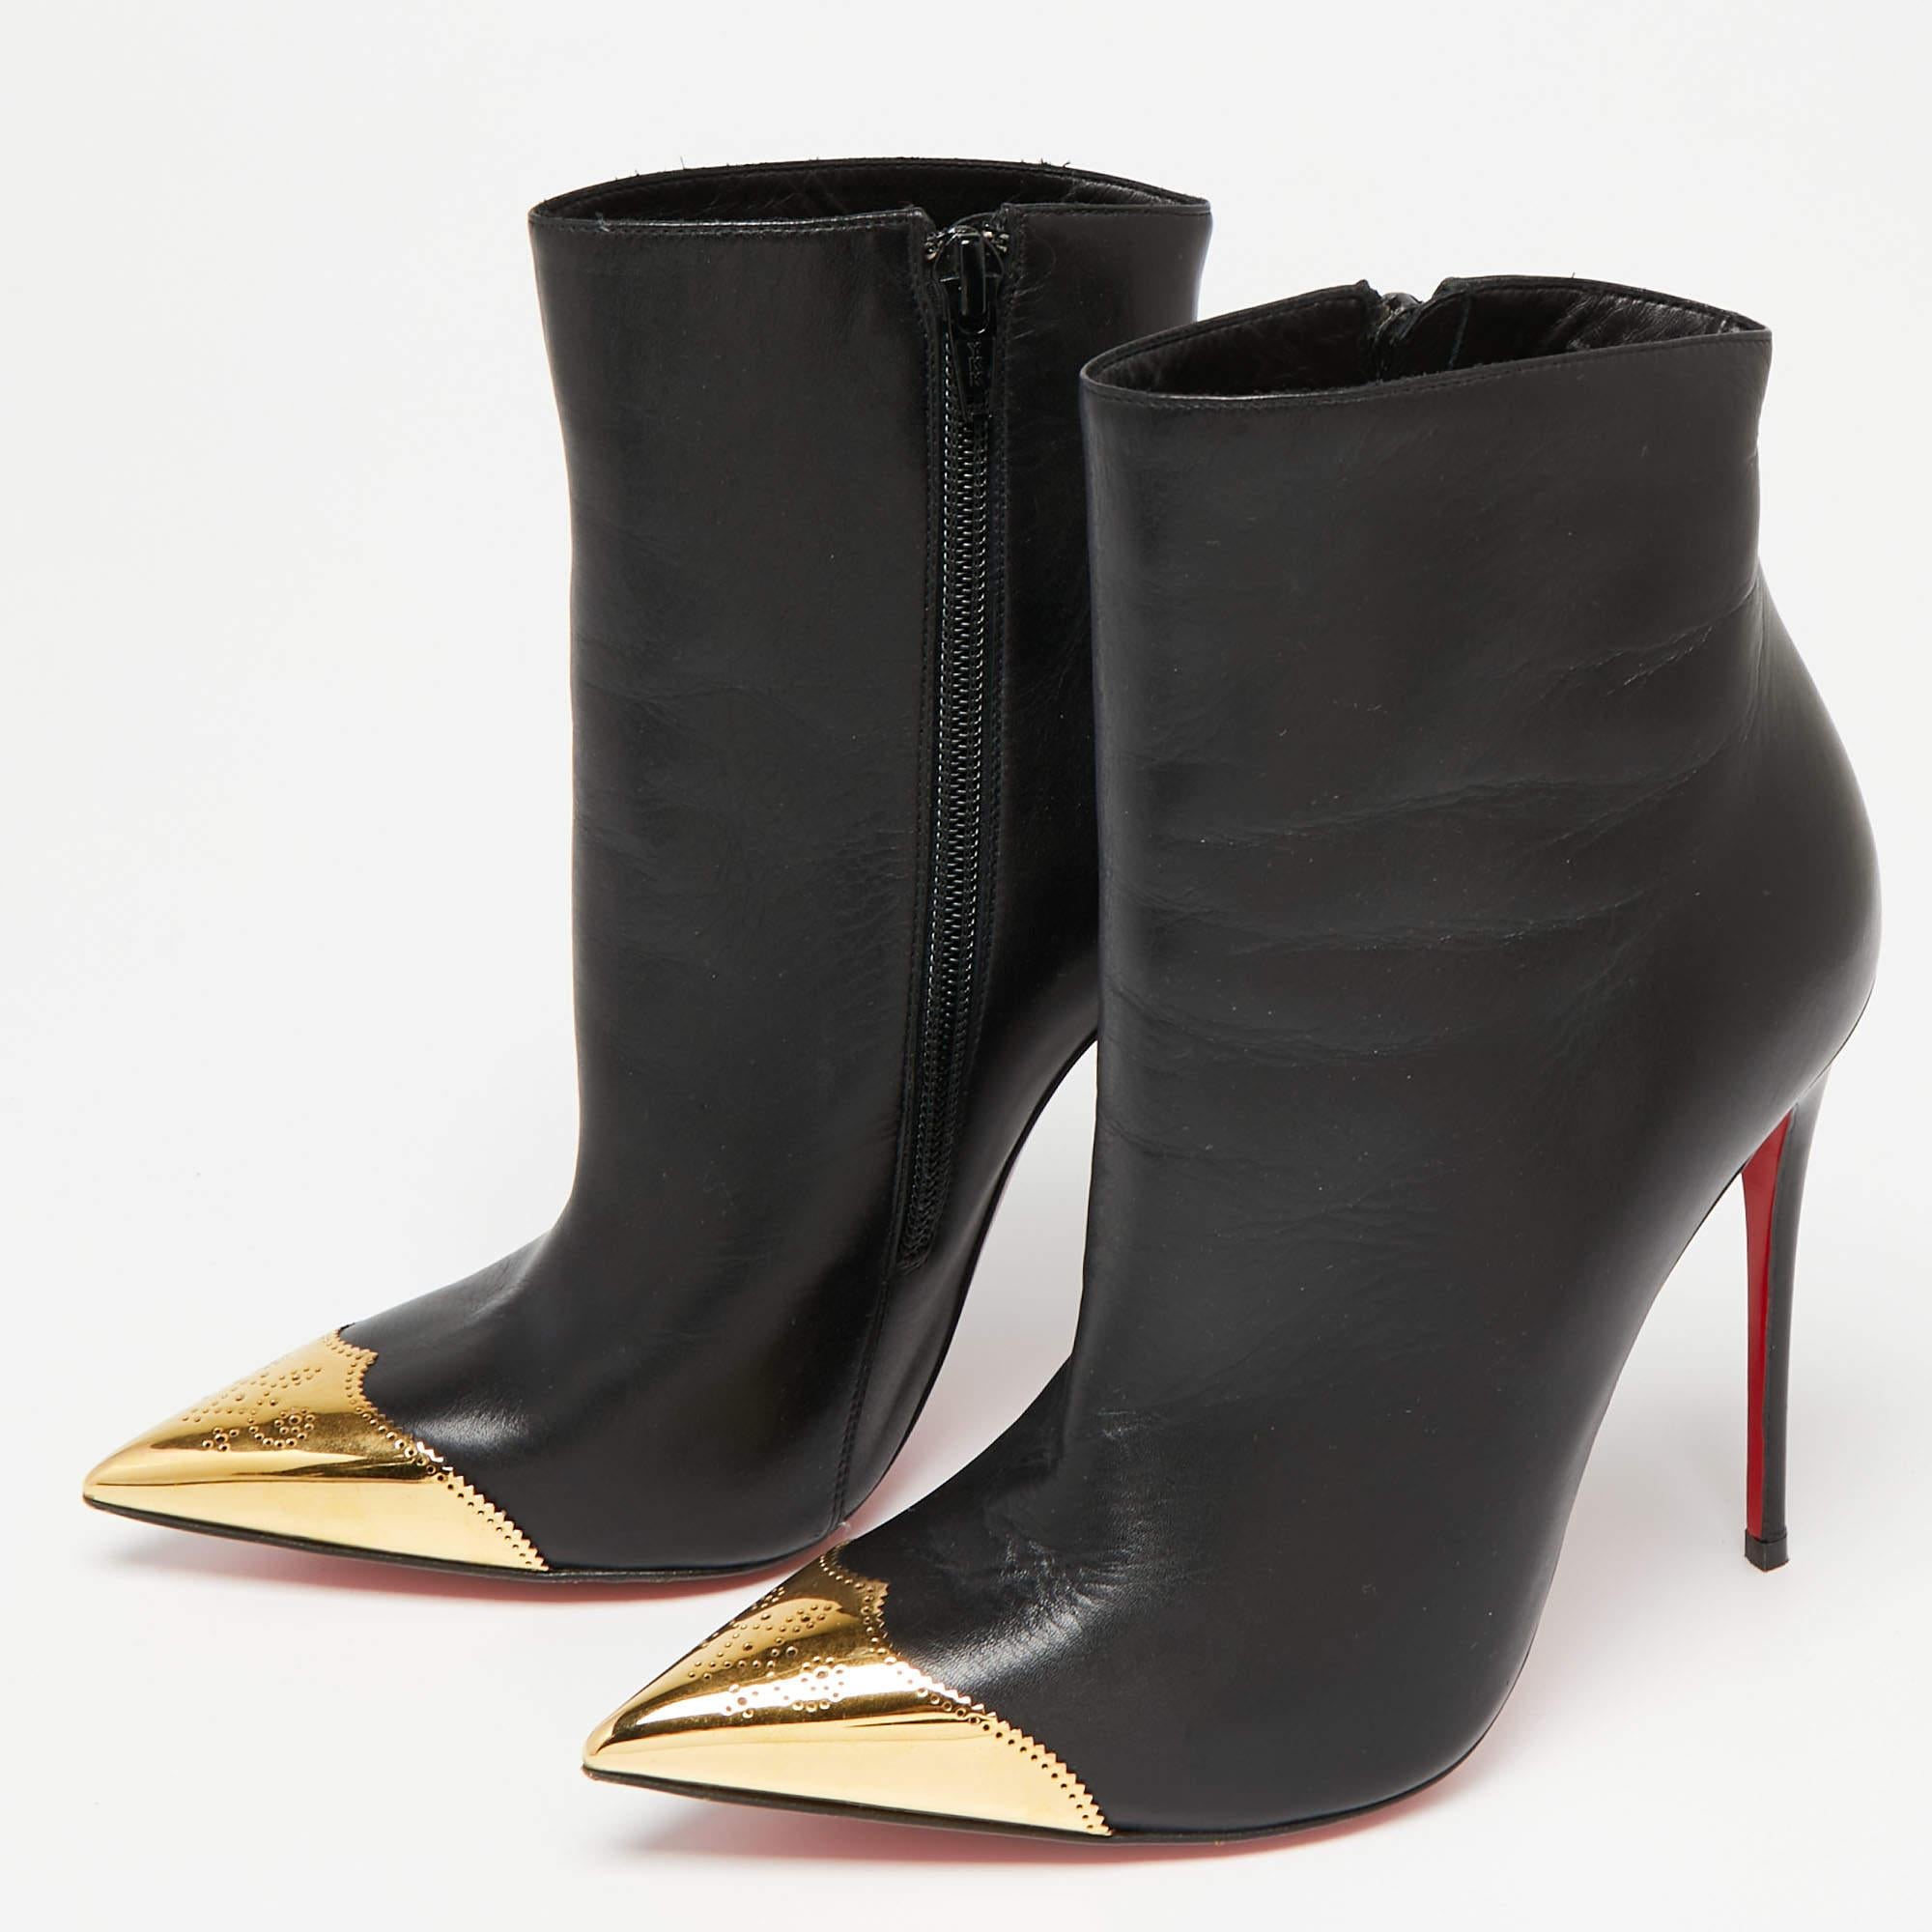 Christian Louboutin Black Leather Calamijane Pointed-Toe Ankle Booties Size 35.5 In Good Condition For Sale In Dubai, Al Qouz 2